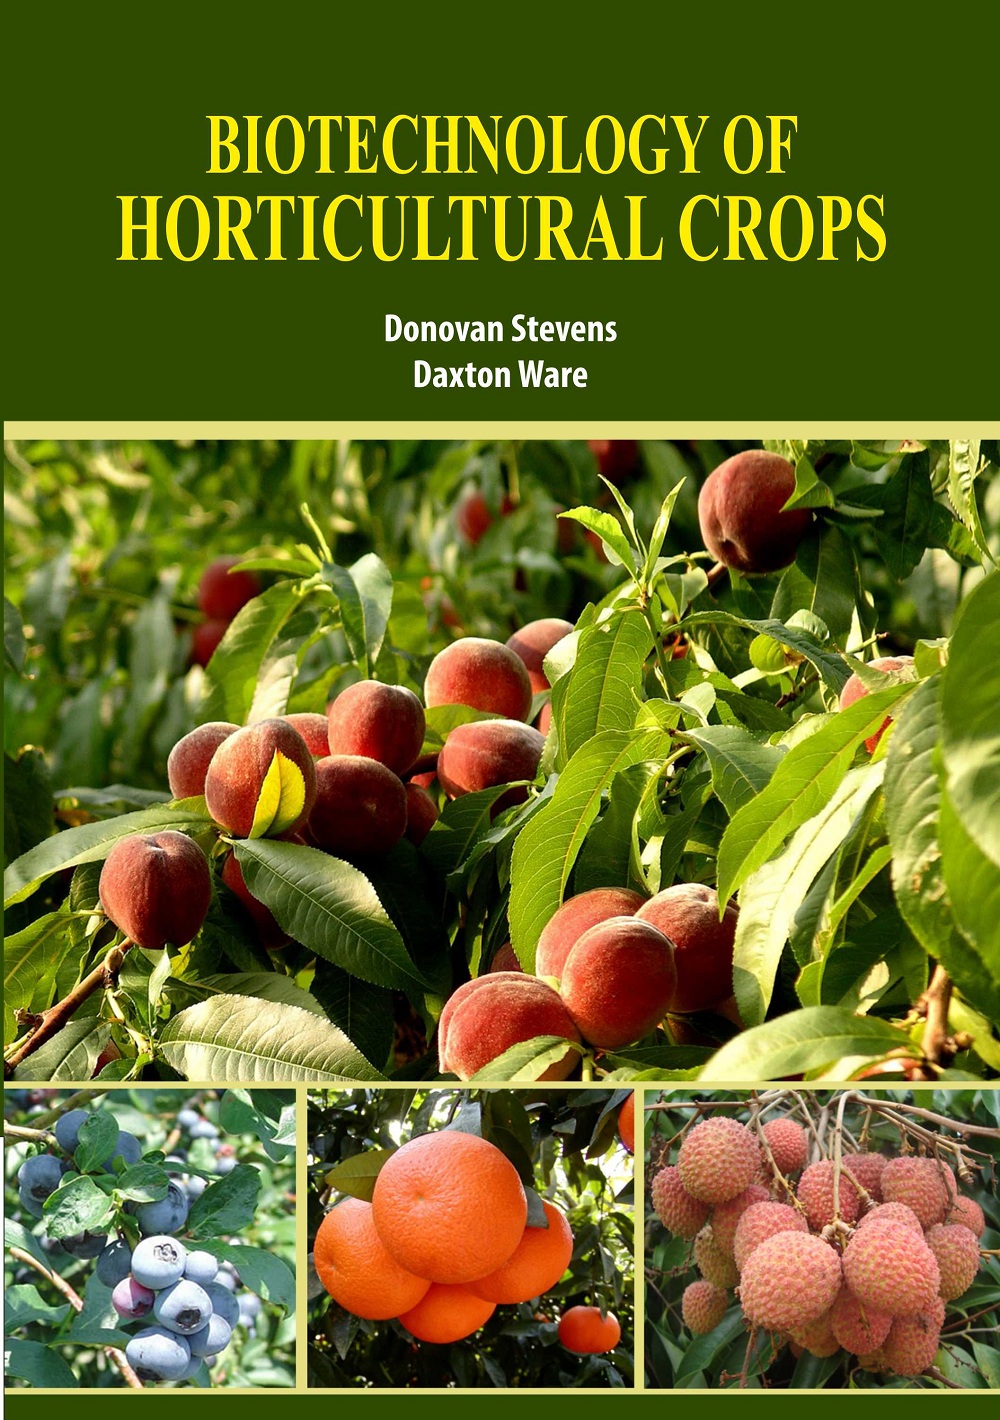 Biotechnology of Horticultural Crops